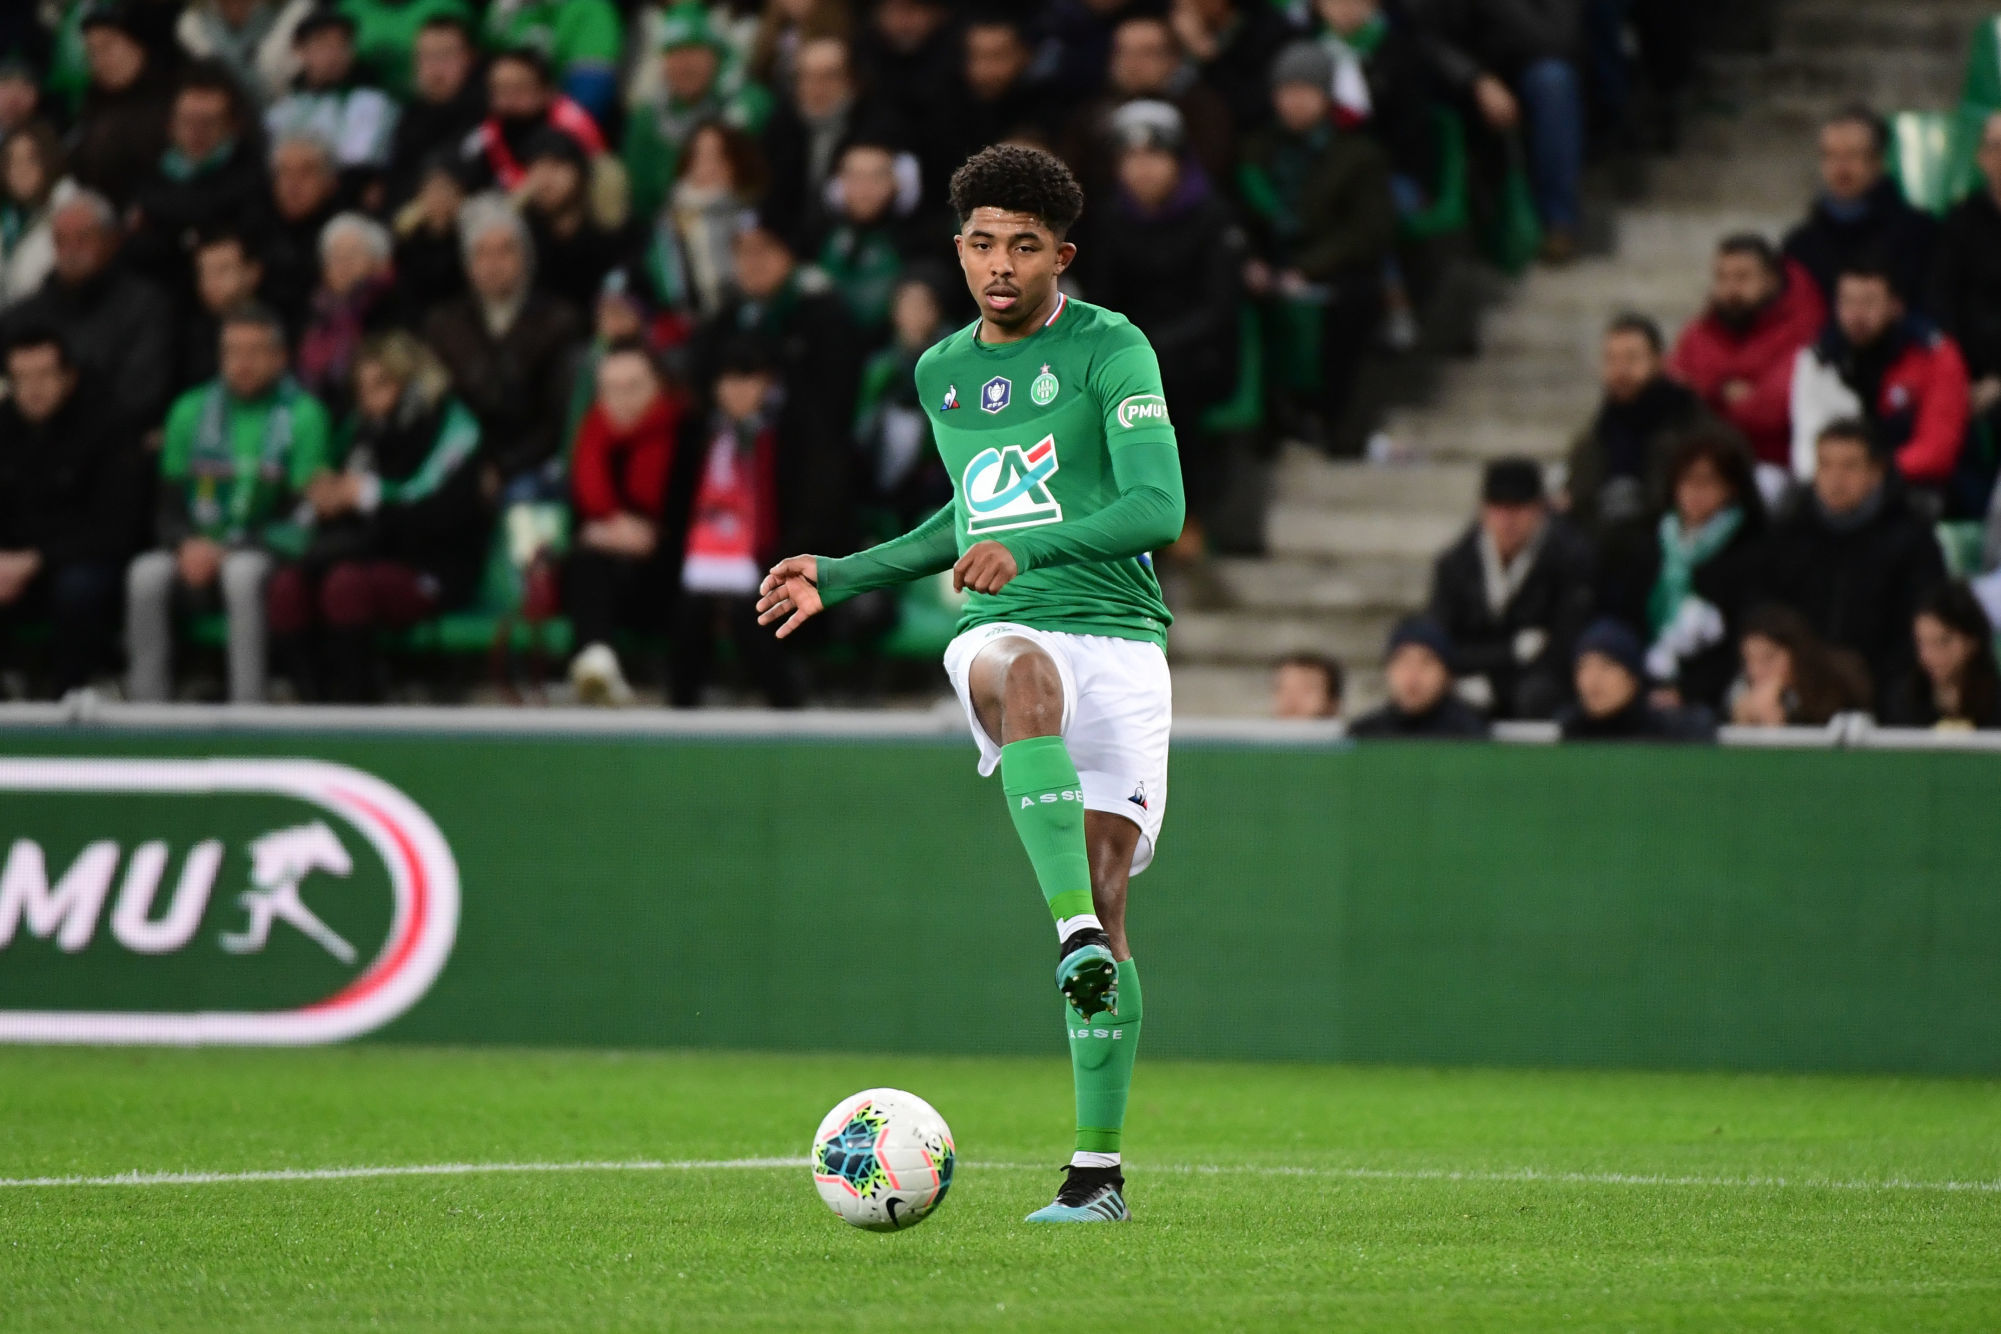 Wesley FOFANA - St Etienne (Photo by Dave Winter/Icon Sport)